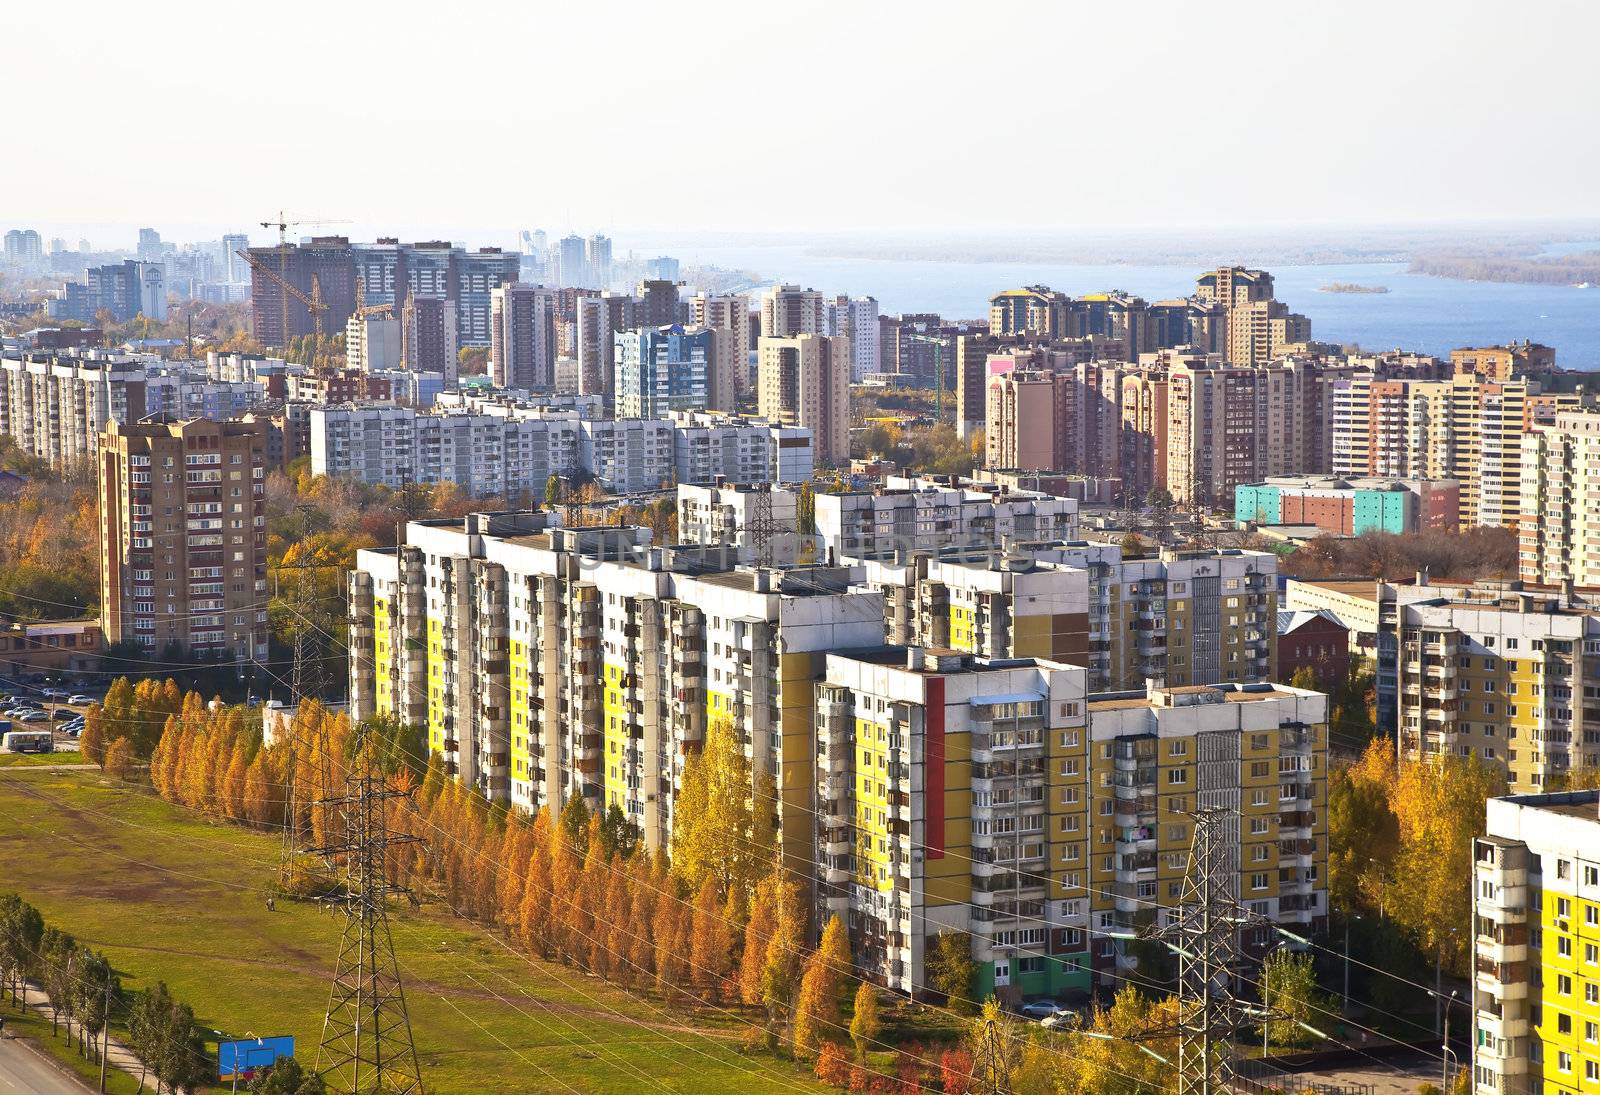 Sleeping area of social housing in the city of Samara. Against the background of the Volga and the houses under construction in the city center. The urban landscape.